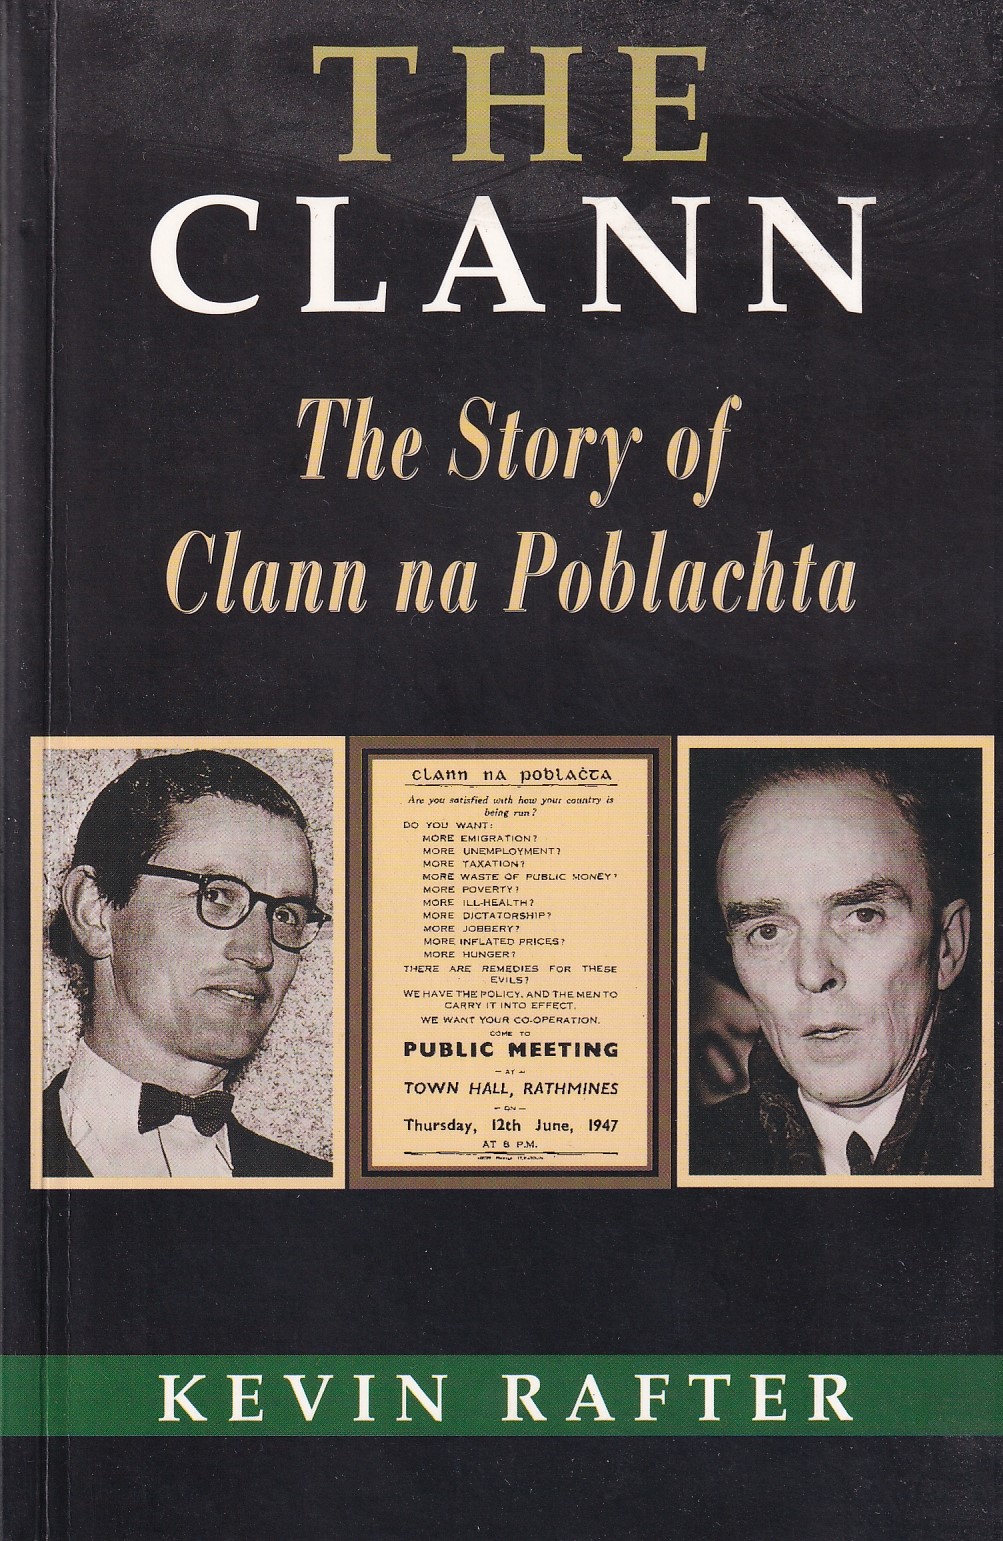 The Clann: The Story of Clann na Poblachta by Kevin Rafter